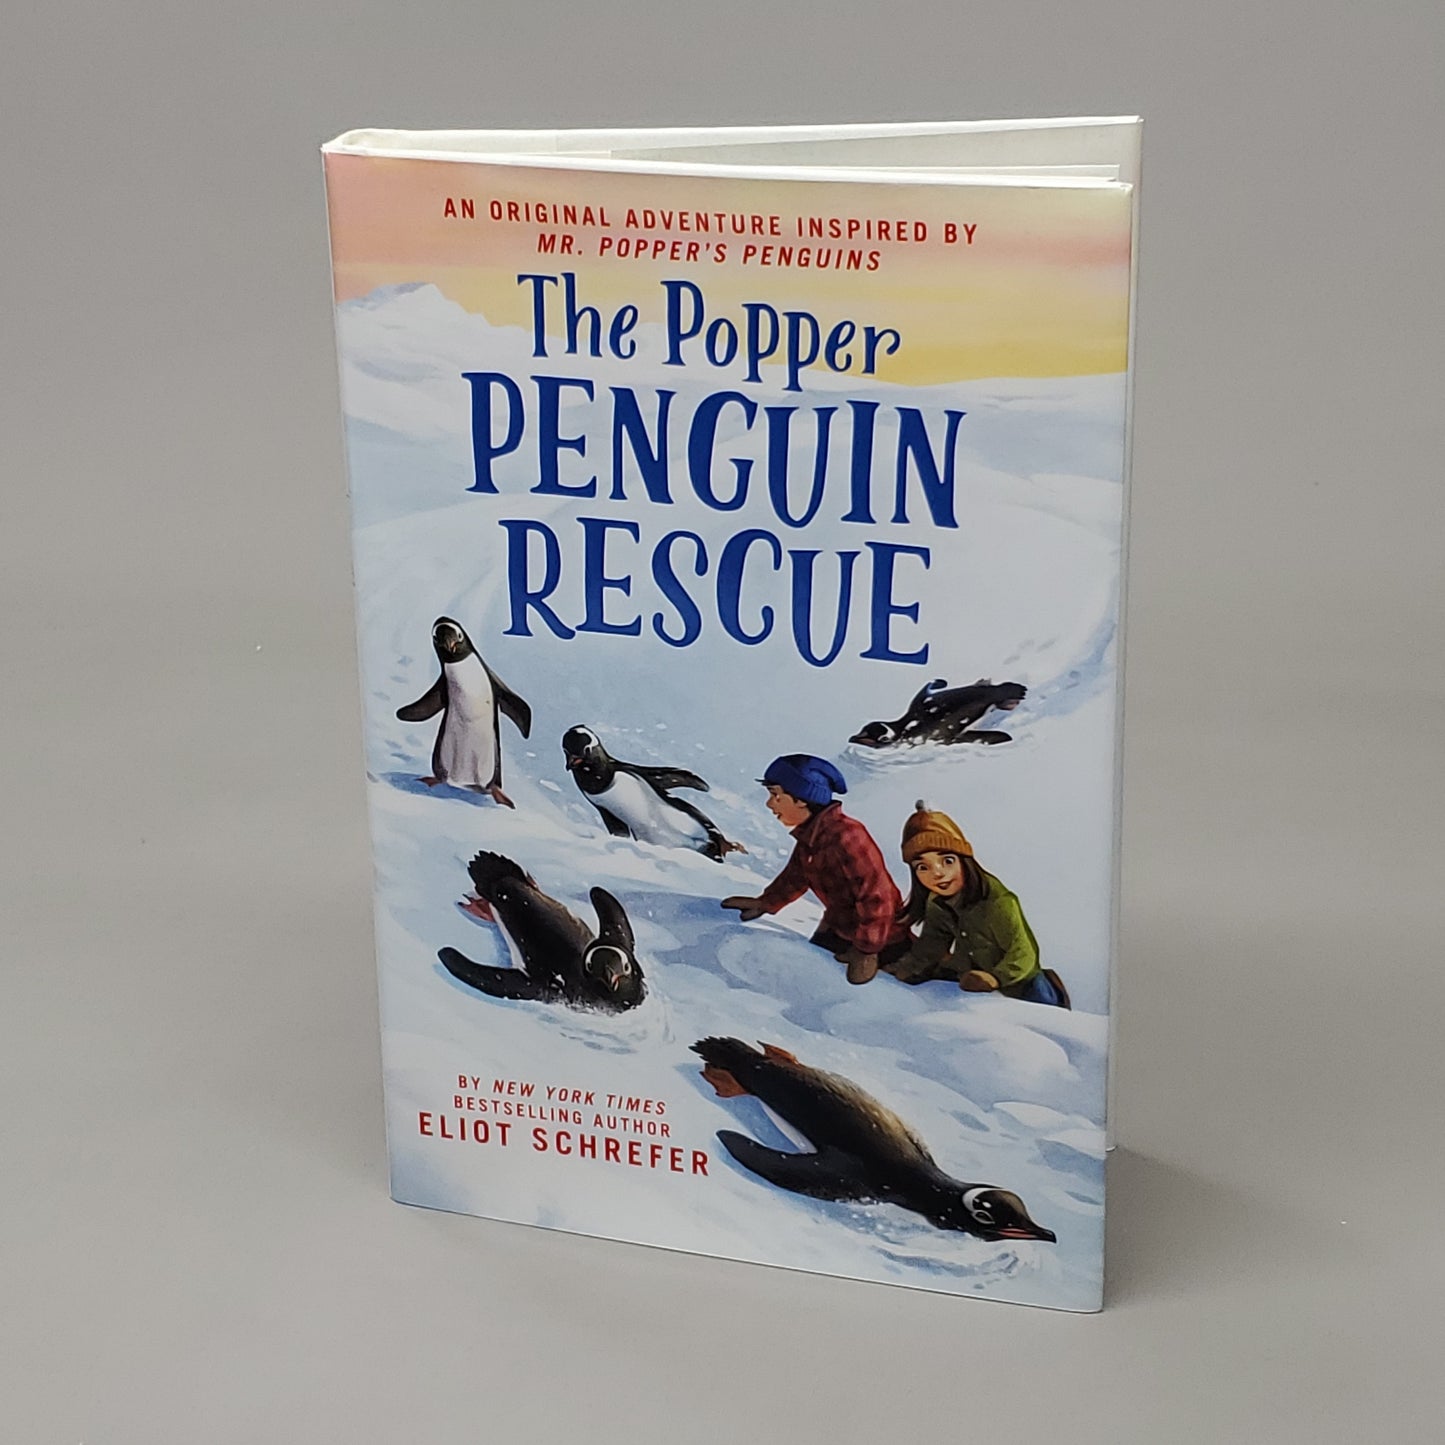 THE POPPER PENGUIN RESCUE by Eliot Schrefer Book Hardback (New)